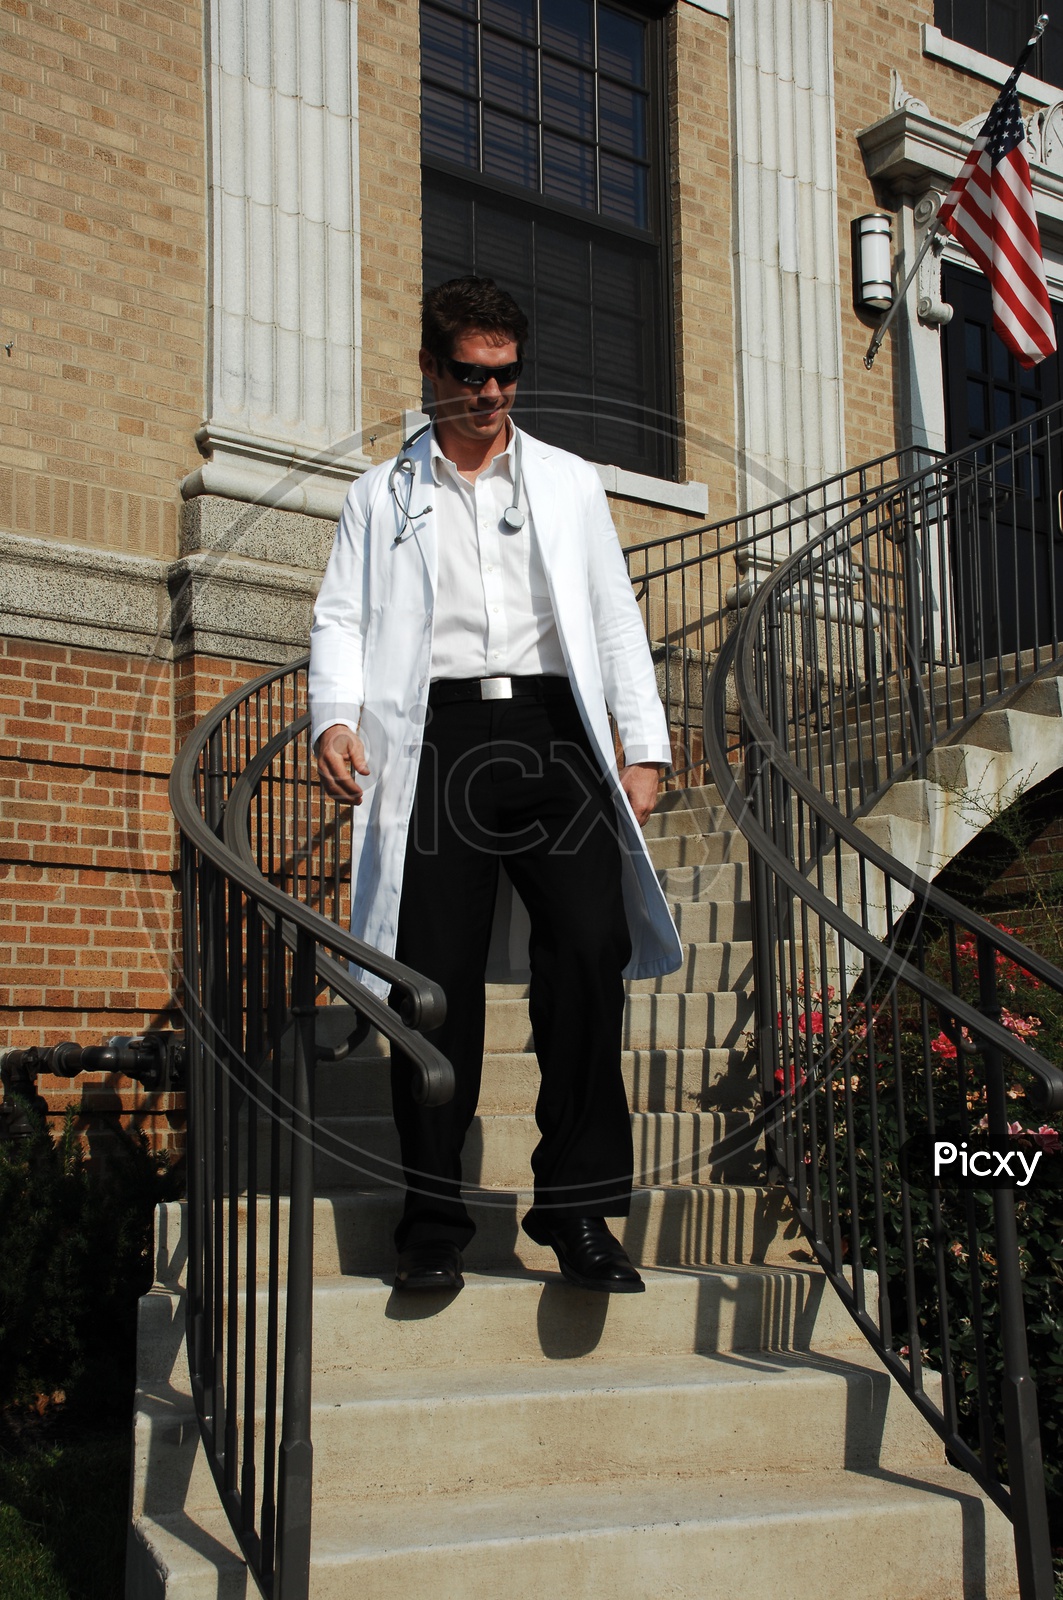 A male doctor wearing white coat with stethoscope waiting down the stairs